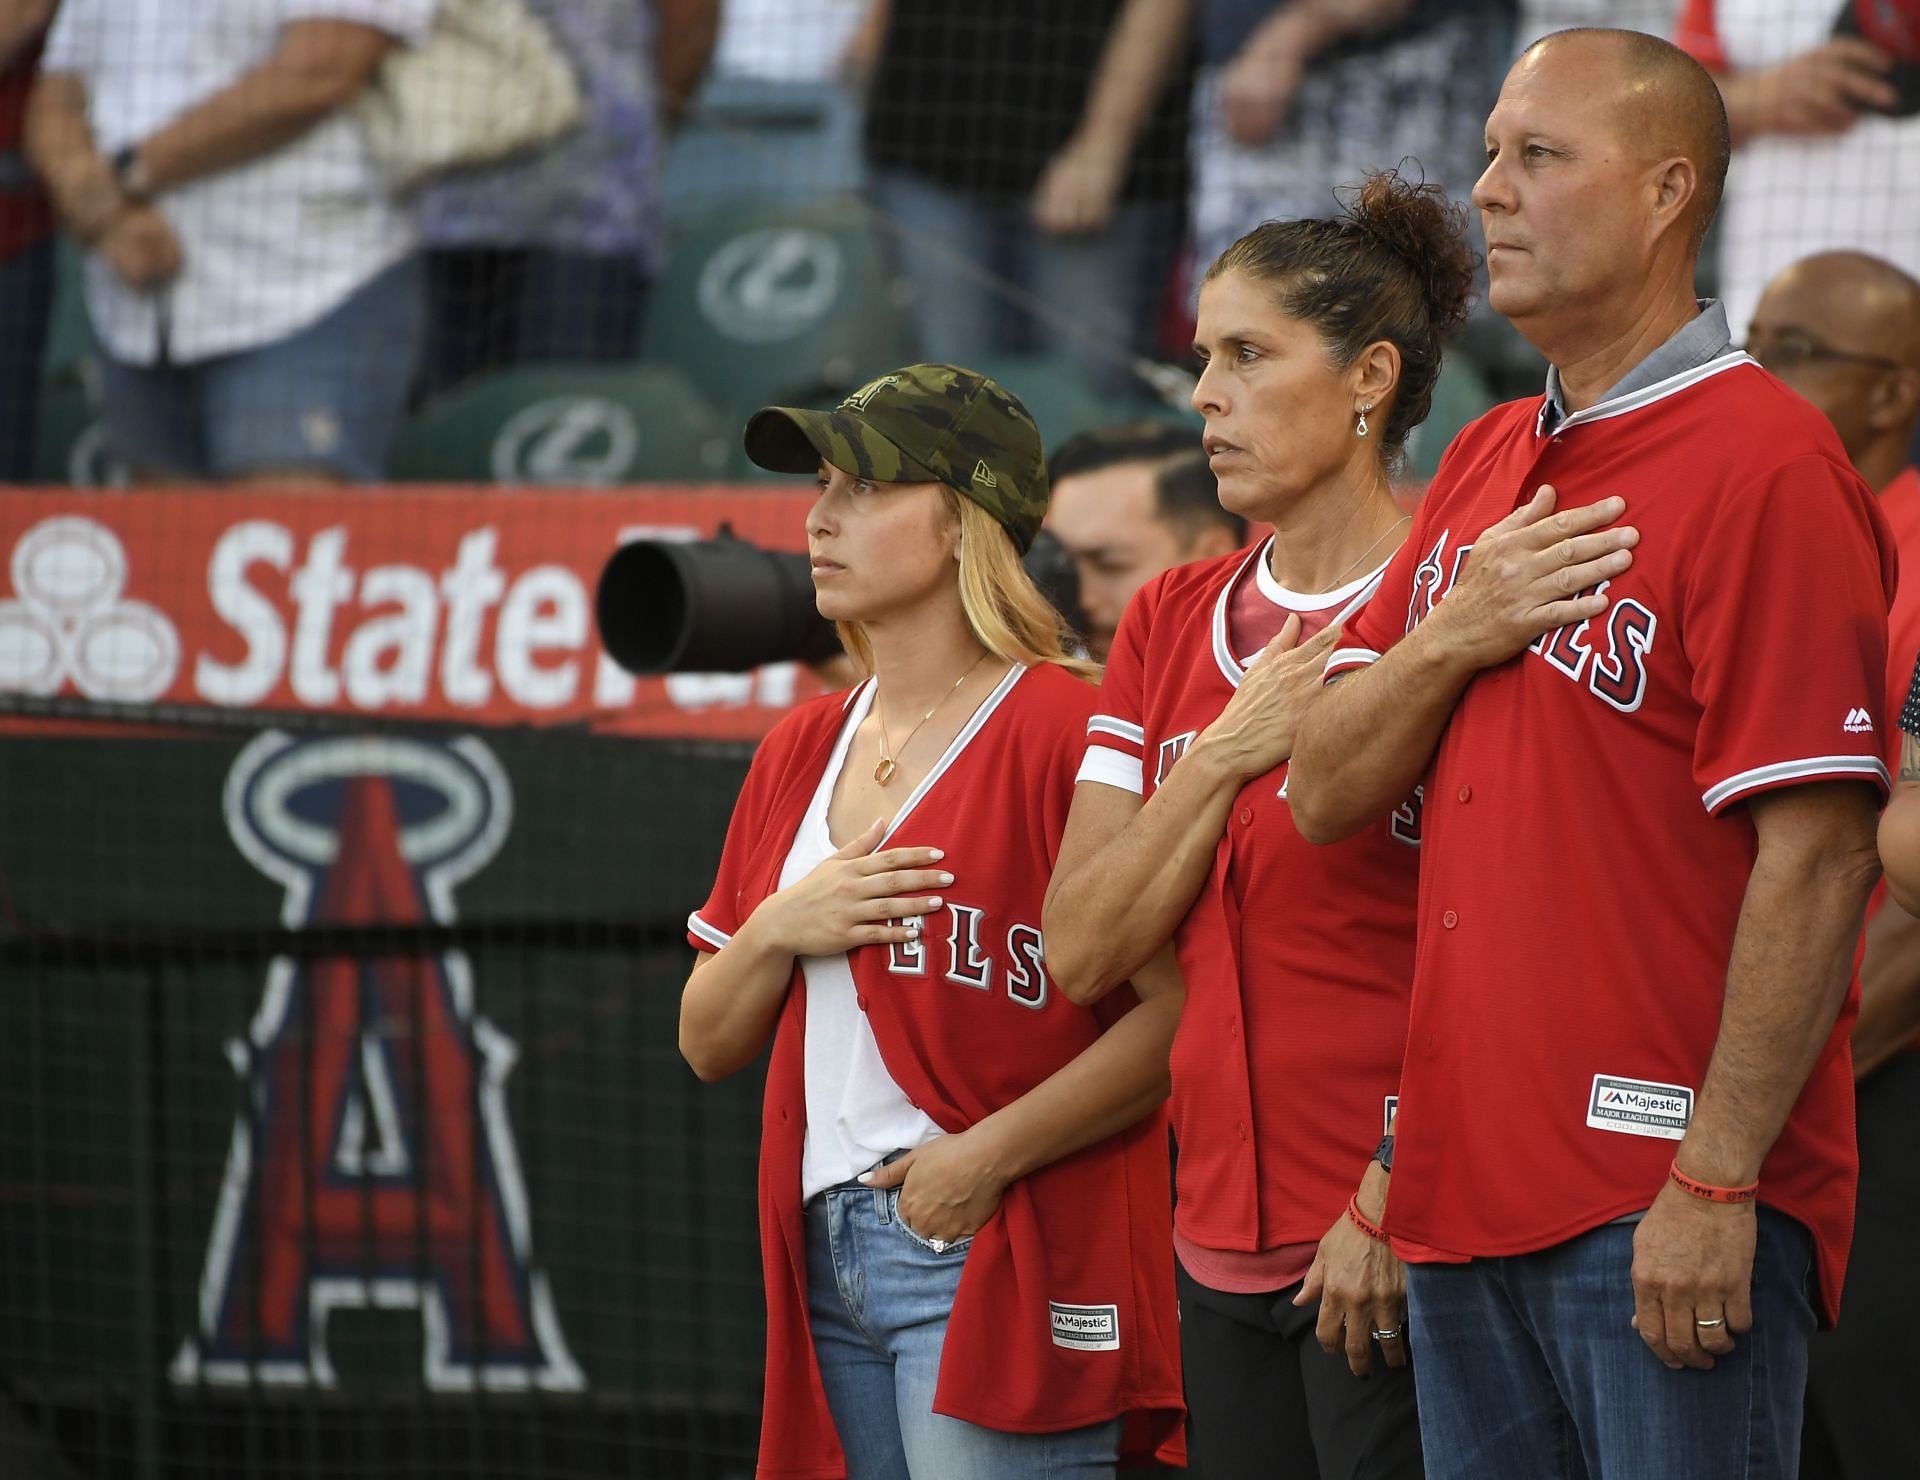 Seattle Mariners v Los Angeles Angels of Anaheim: ANAHEIM, CA - JULY 12: Tyler Skaggs wife Carli Skaggs, his mother Debbie Hetman stand next to step father Danny Hetman during the National Anthem before the Los Angeles Angels of Anaheim play the Seattle Mariners at Angel Stadium of Anaheim on July 12, 2019 in Anaheim, California. (Photo by John McCoy/Getty Images)